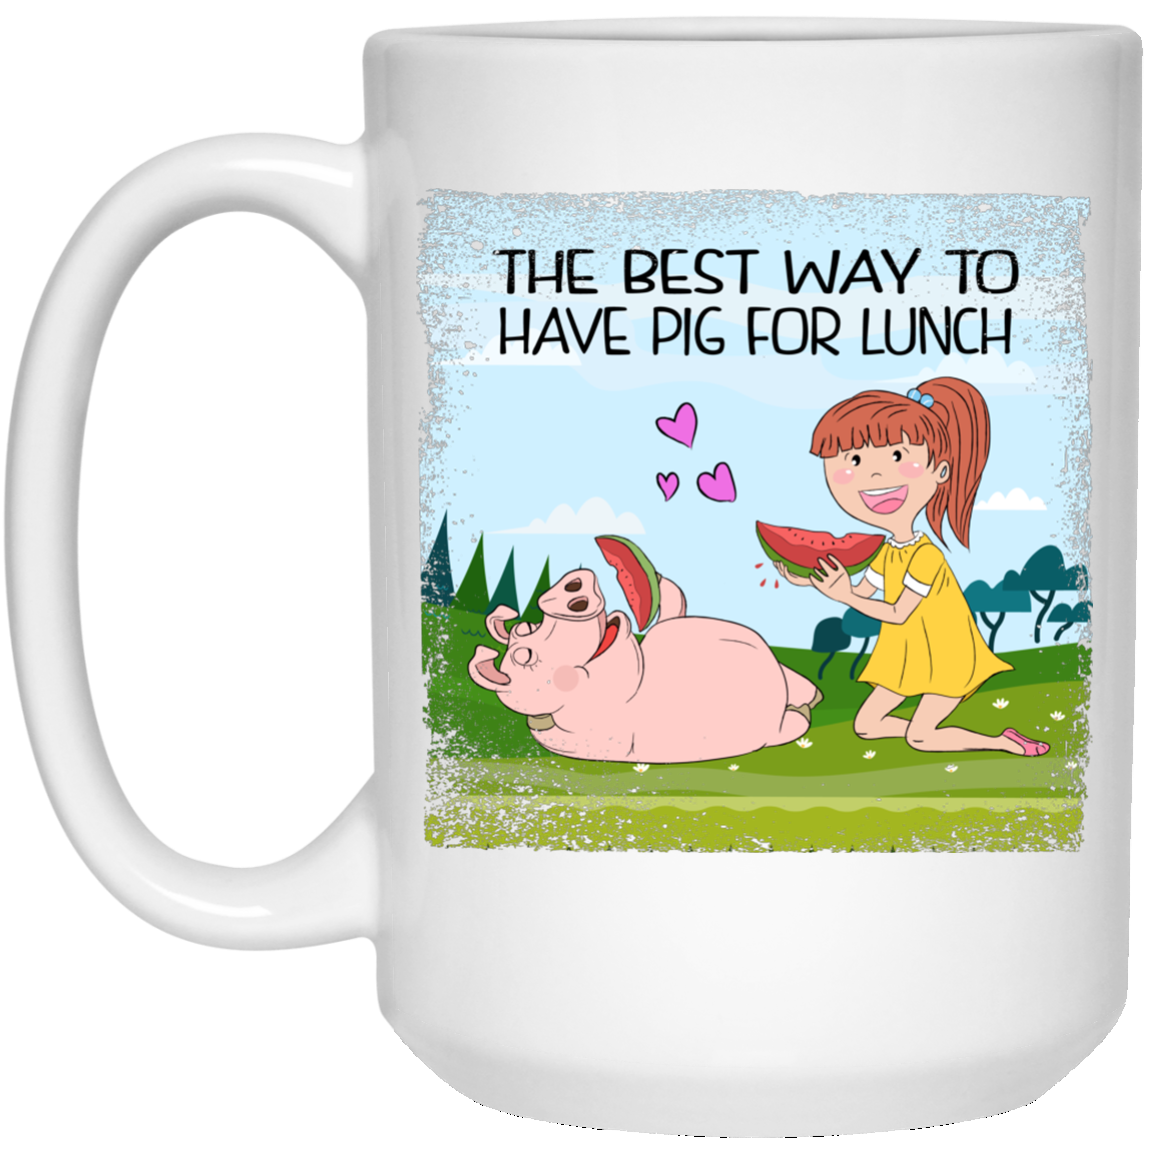 Vegan Mug, Vegan Gifts - The Best Way To Have Lunch With Pig - GoneBold.gift